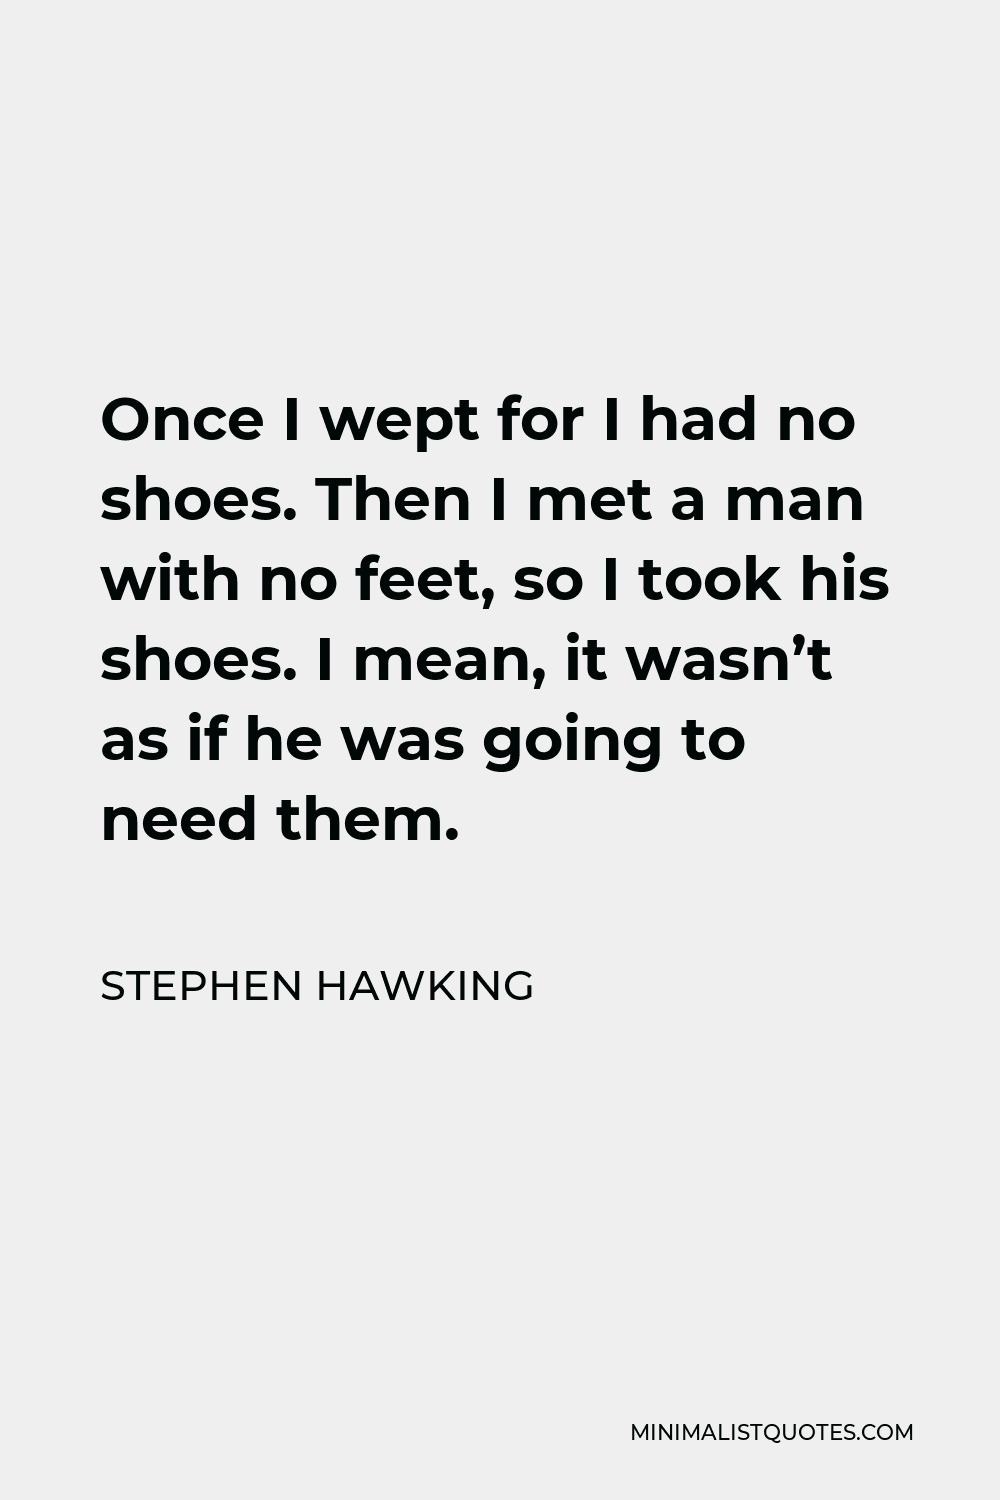 Stephen Hawking Quote - Once I wept for I had no shoes. Then I met a man with no feet, so I took his shoes. I mean, it wasn’t as if he was going to need them.